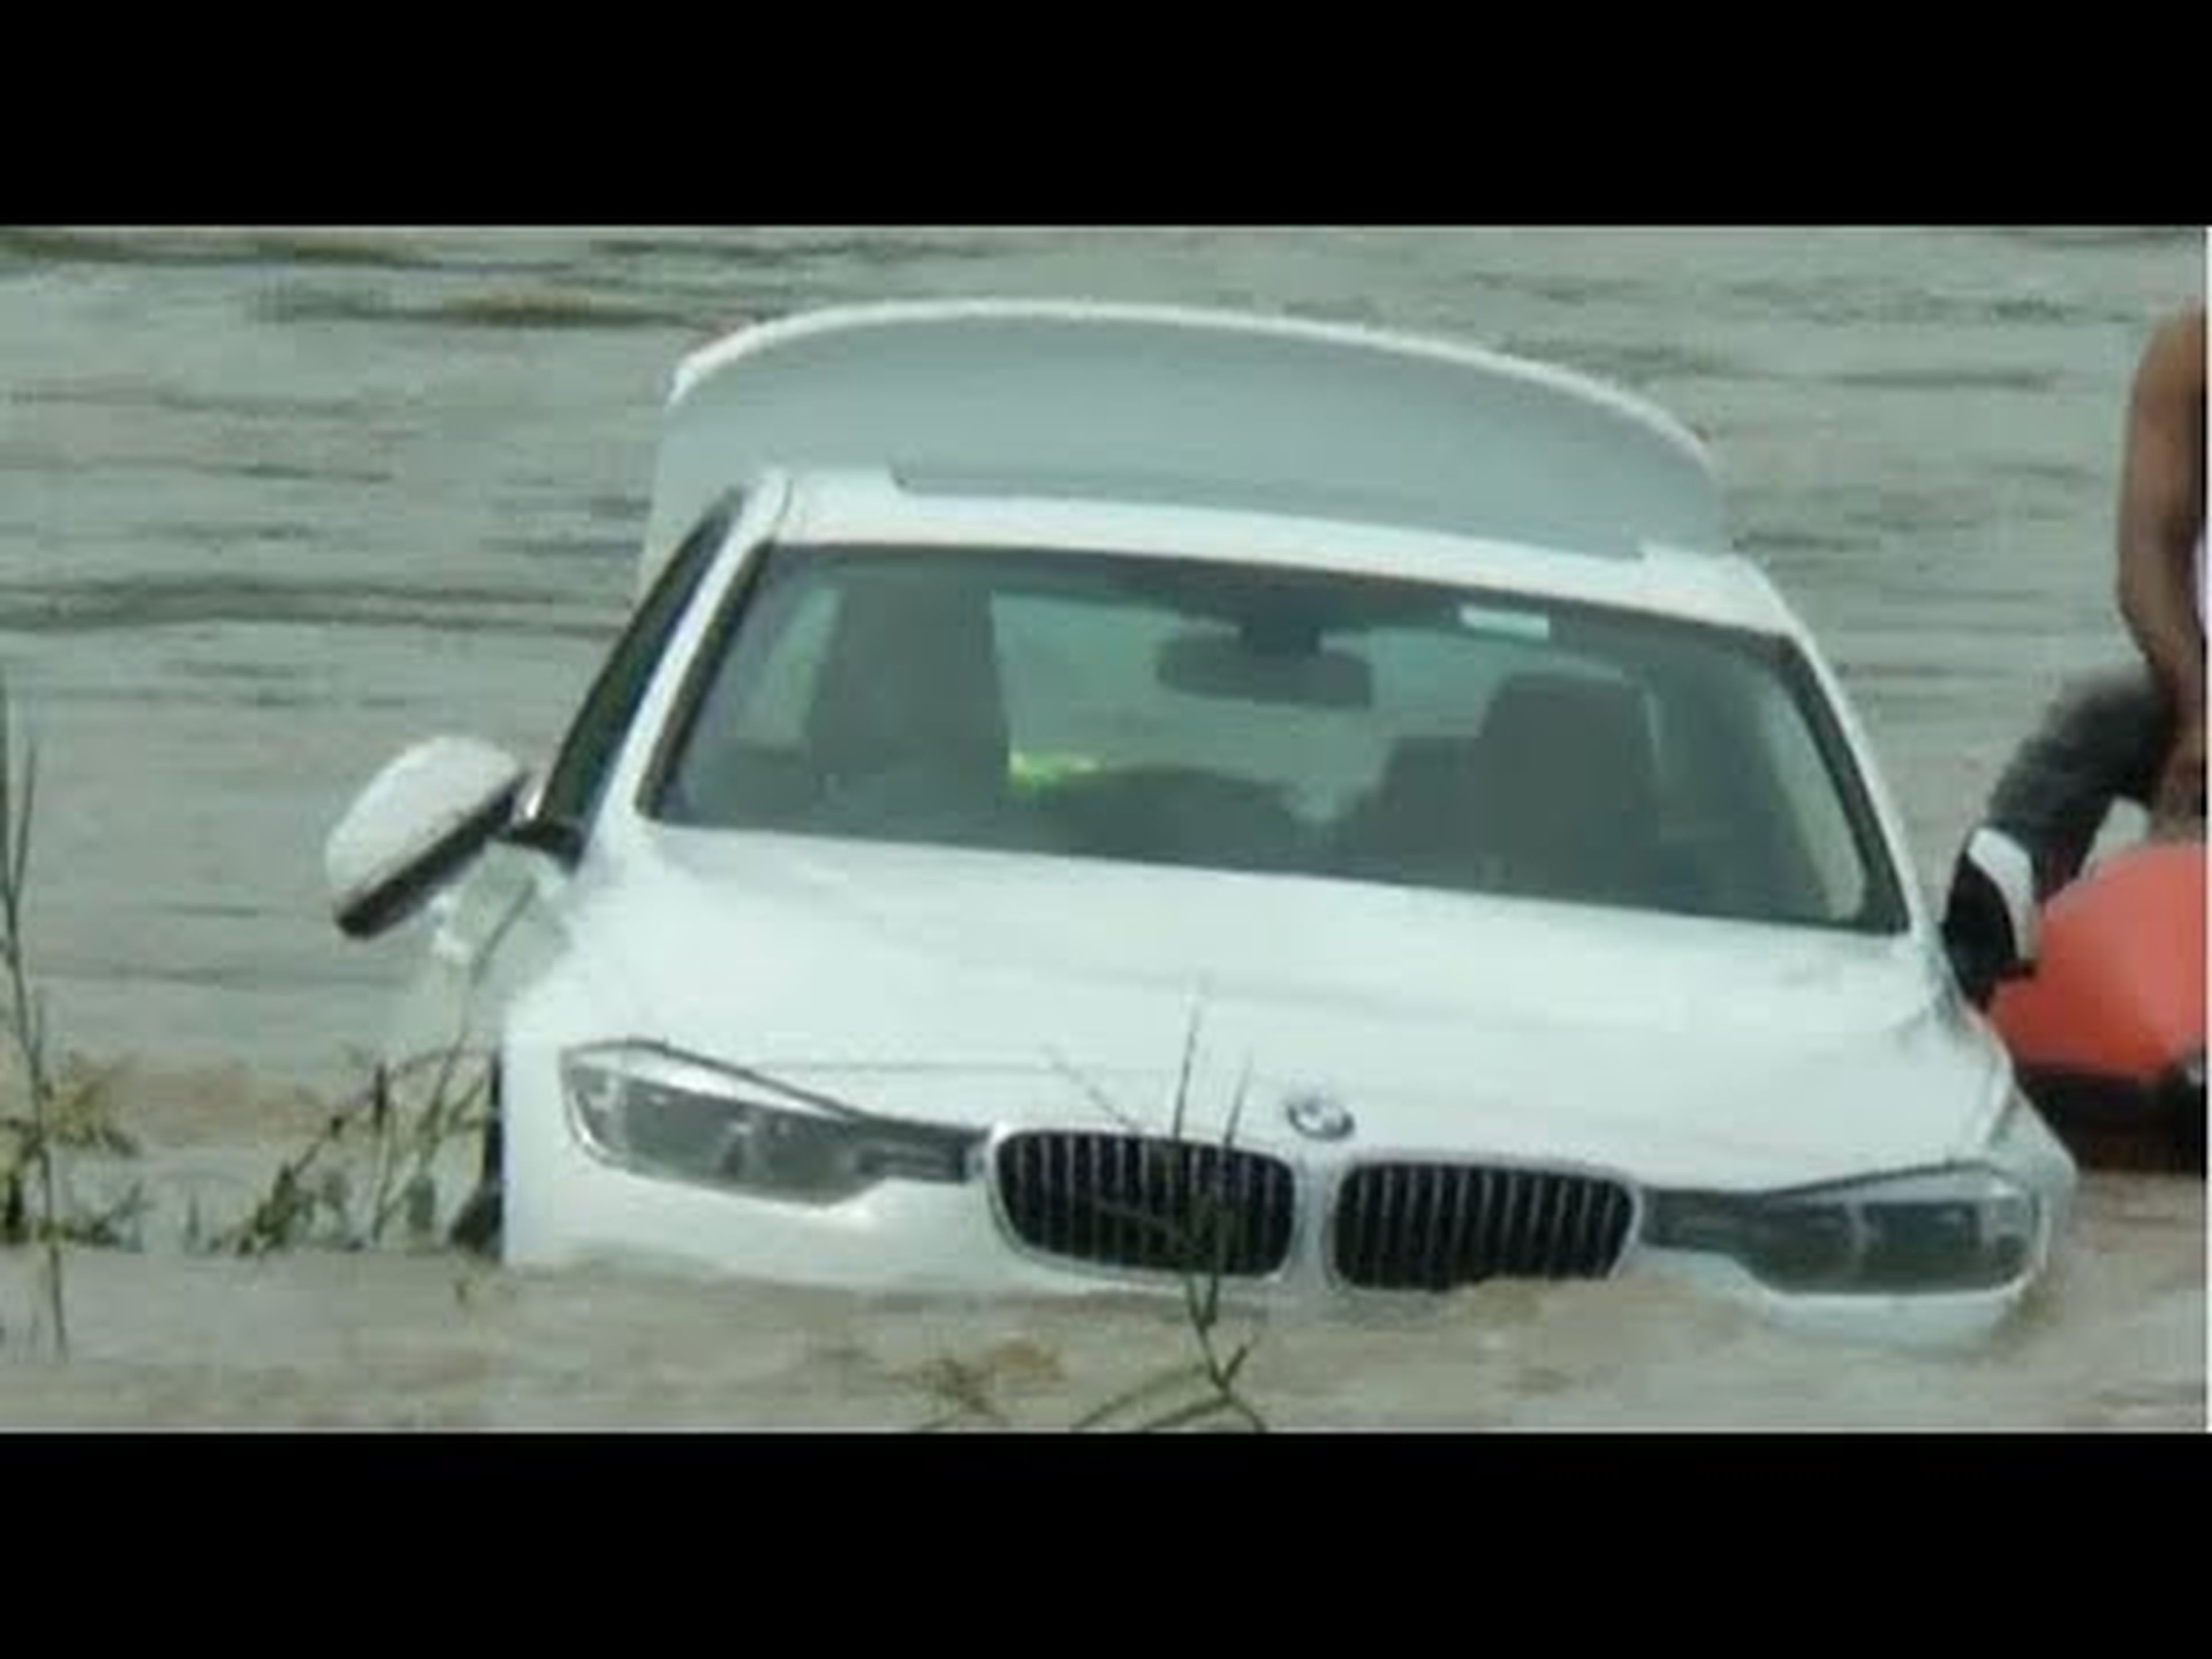 Youth Pushes Luxury BMW in River after father denies New Jaguar Car Request